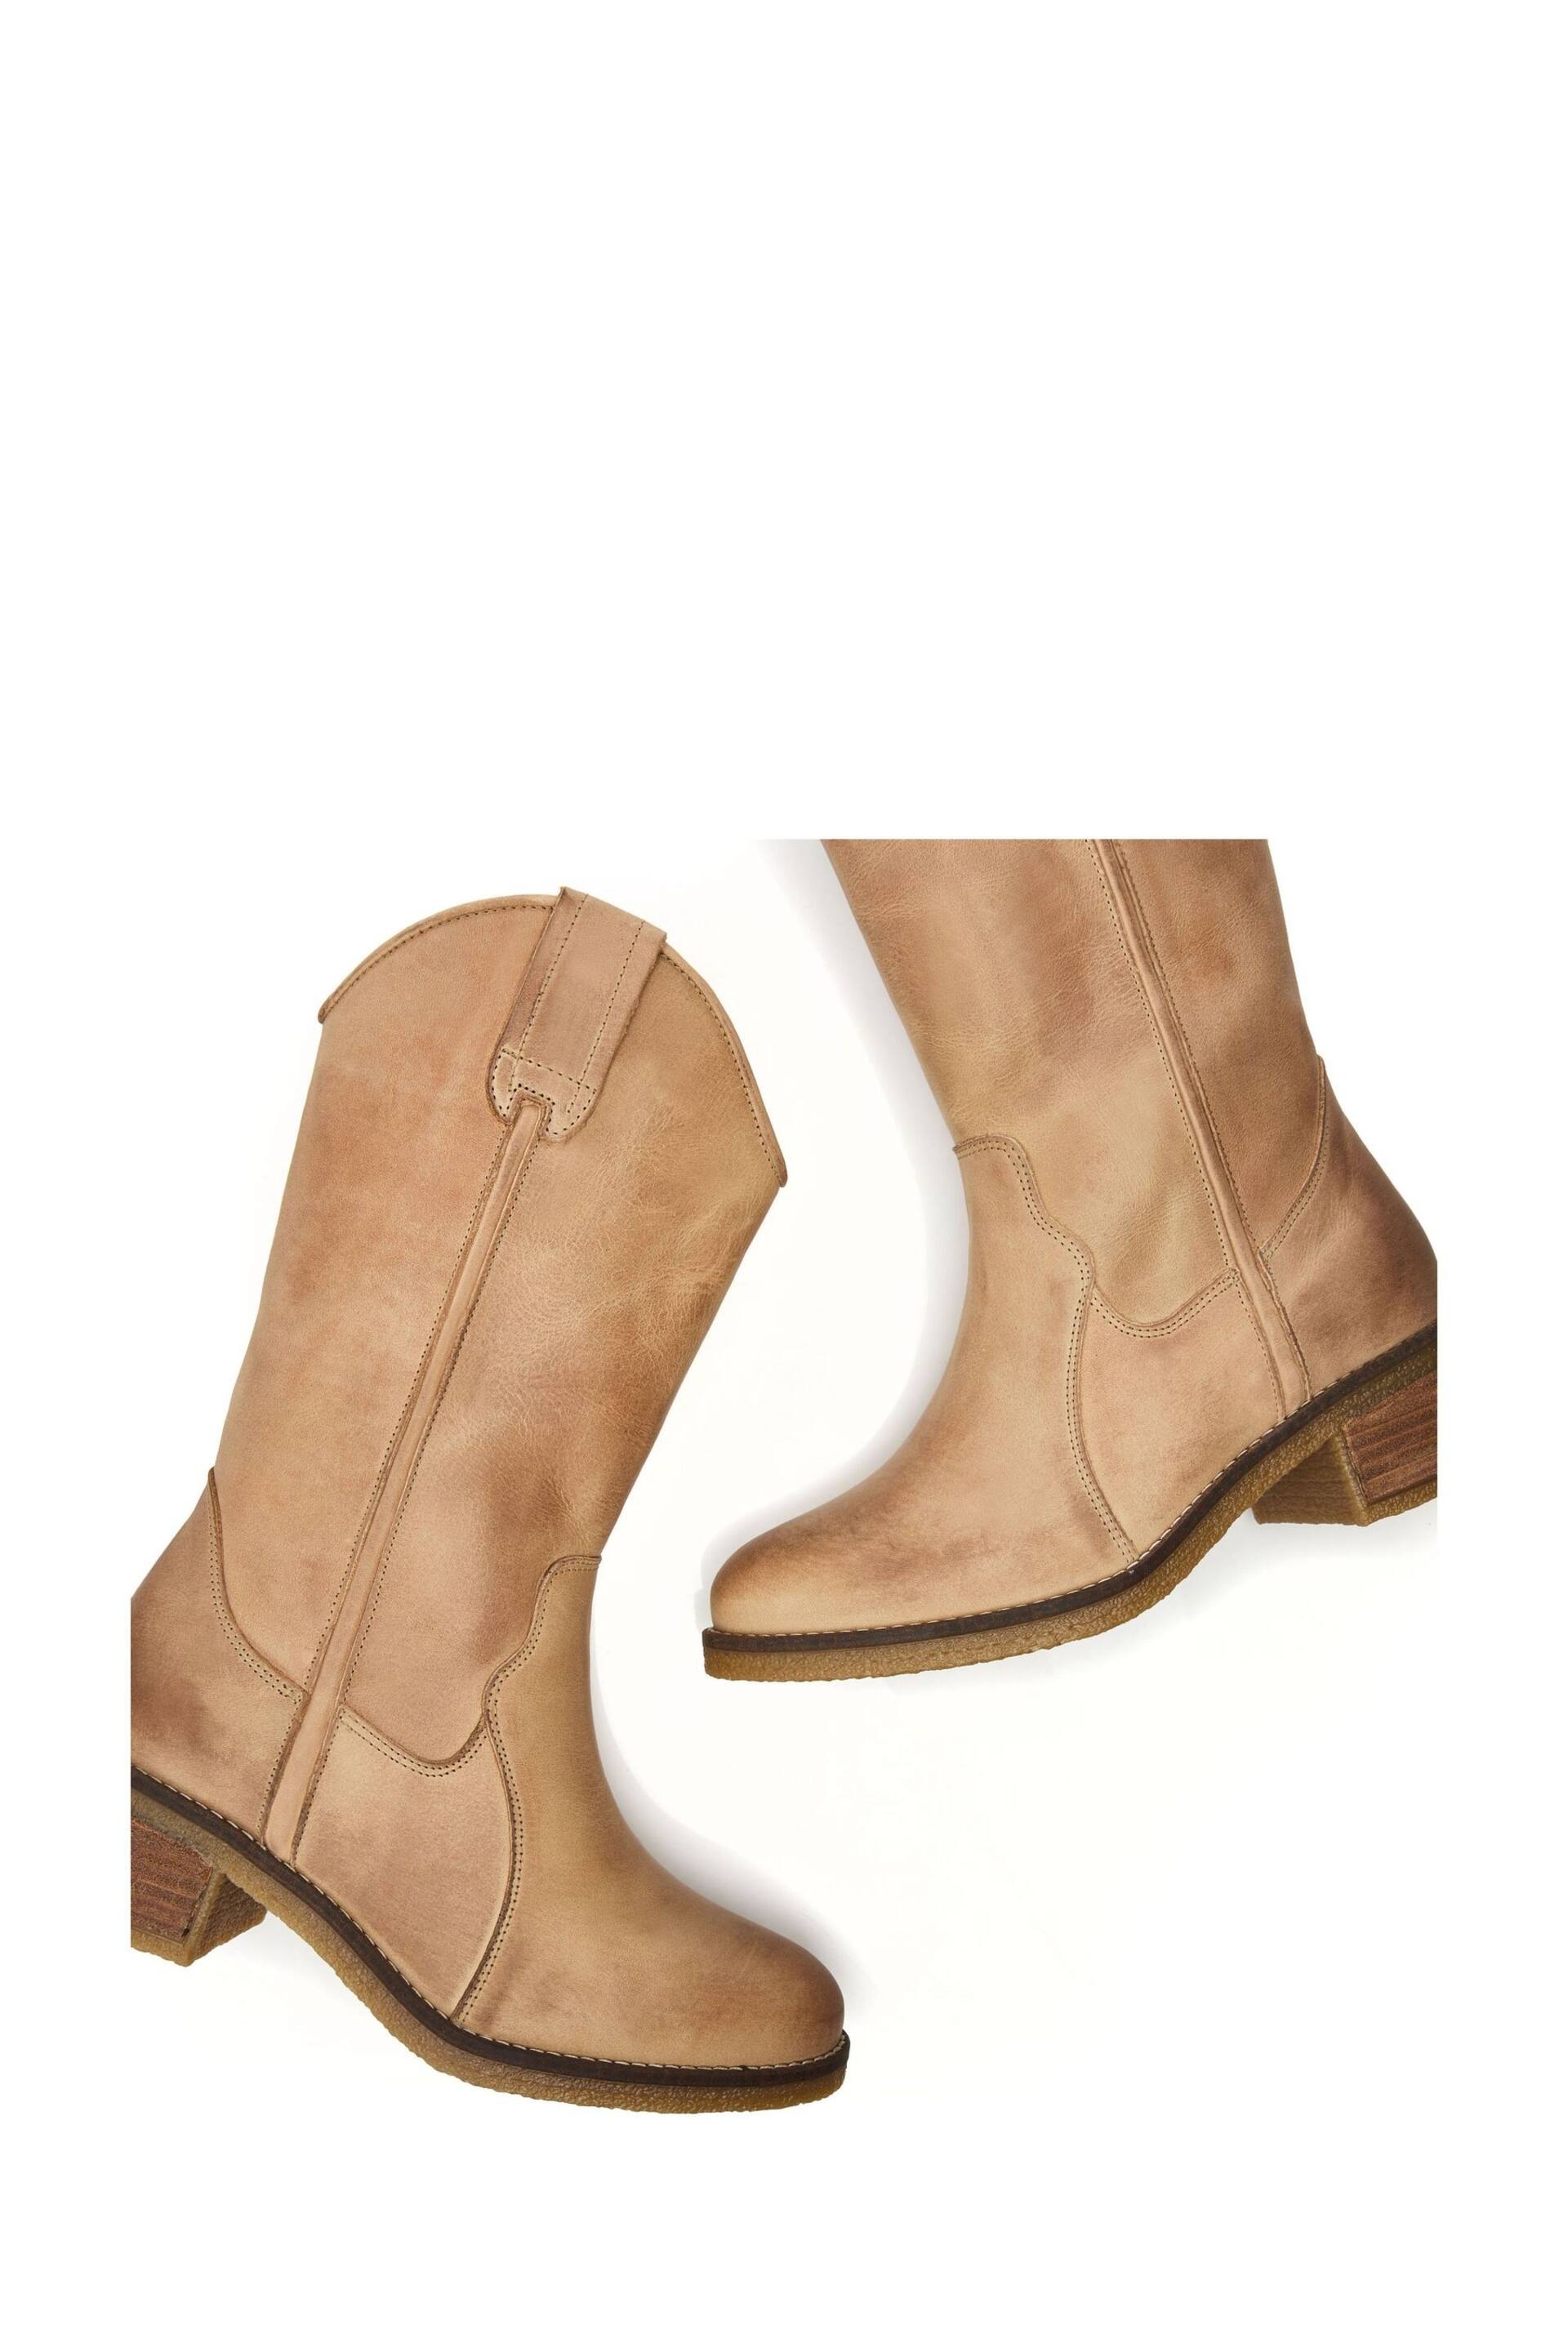 Moda in Pelle Dana Crepe Sole Long Western Natural Boots - Image 4 of 4